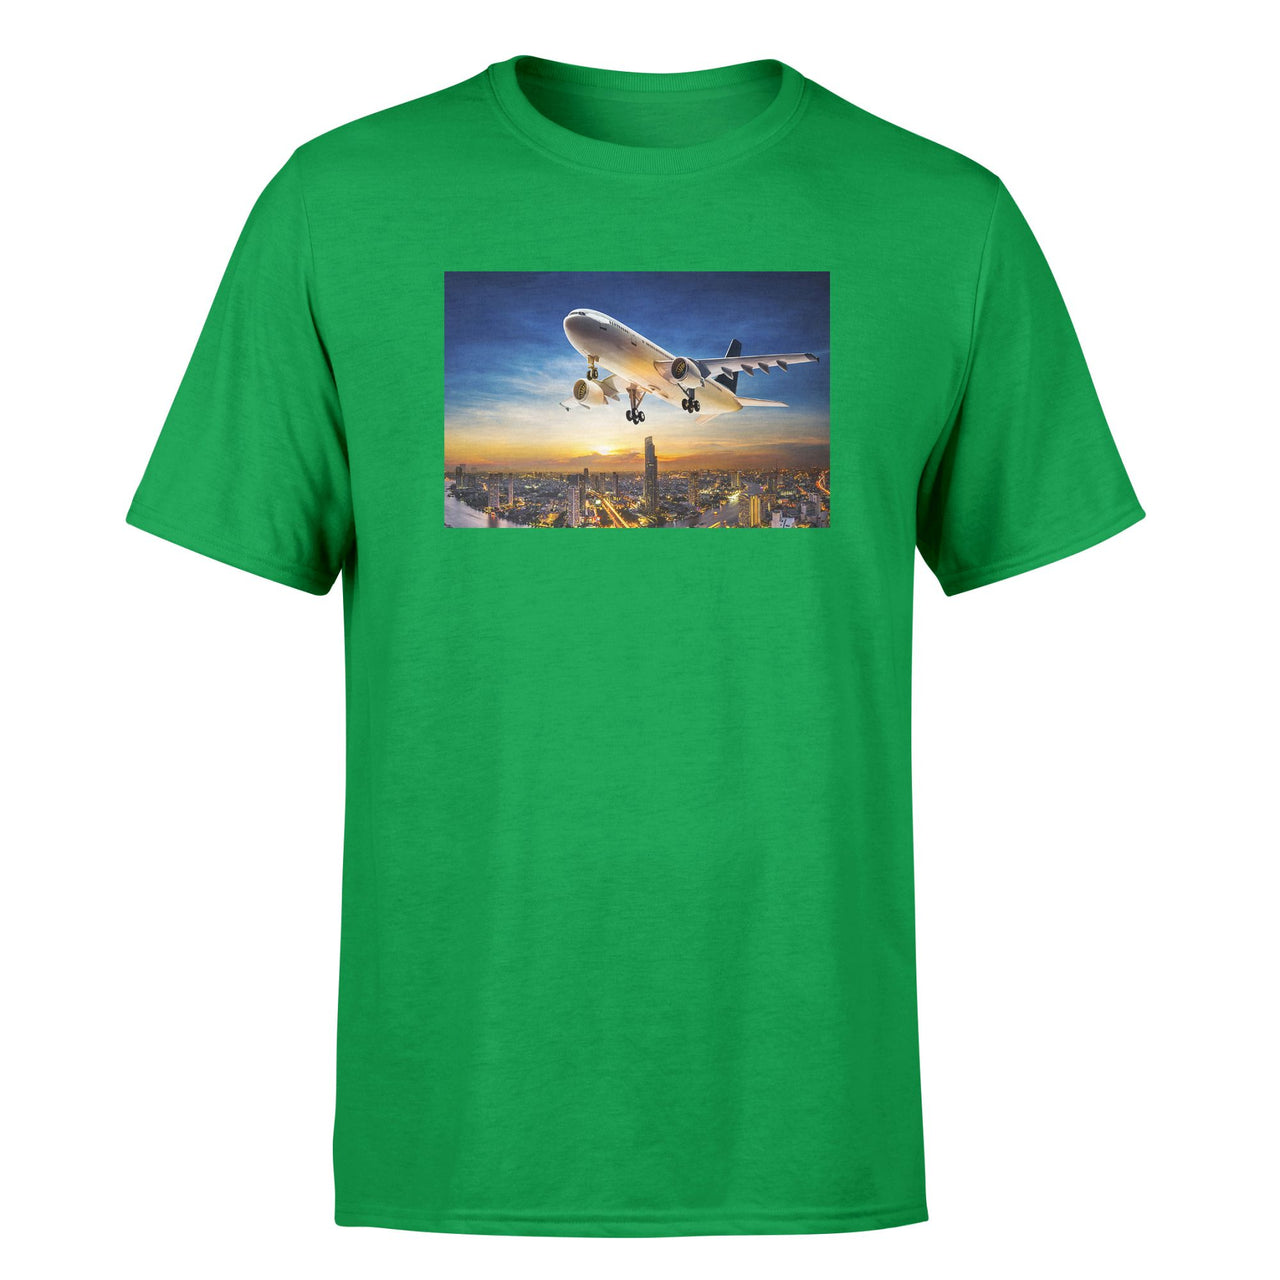 Super Aircraft over City at Sunset Designed T-Shirts